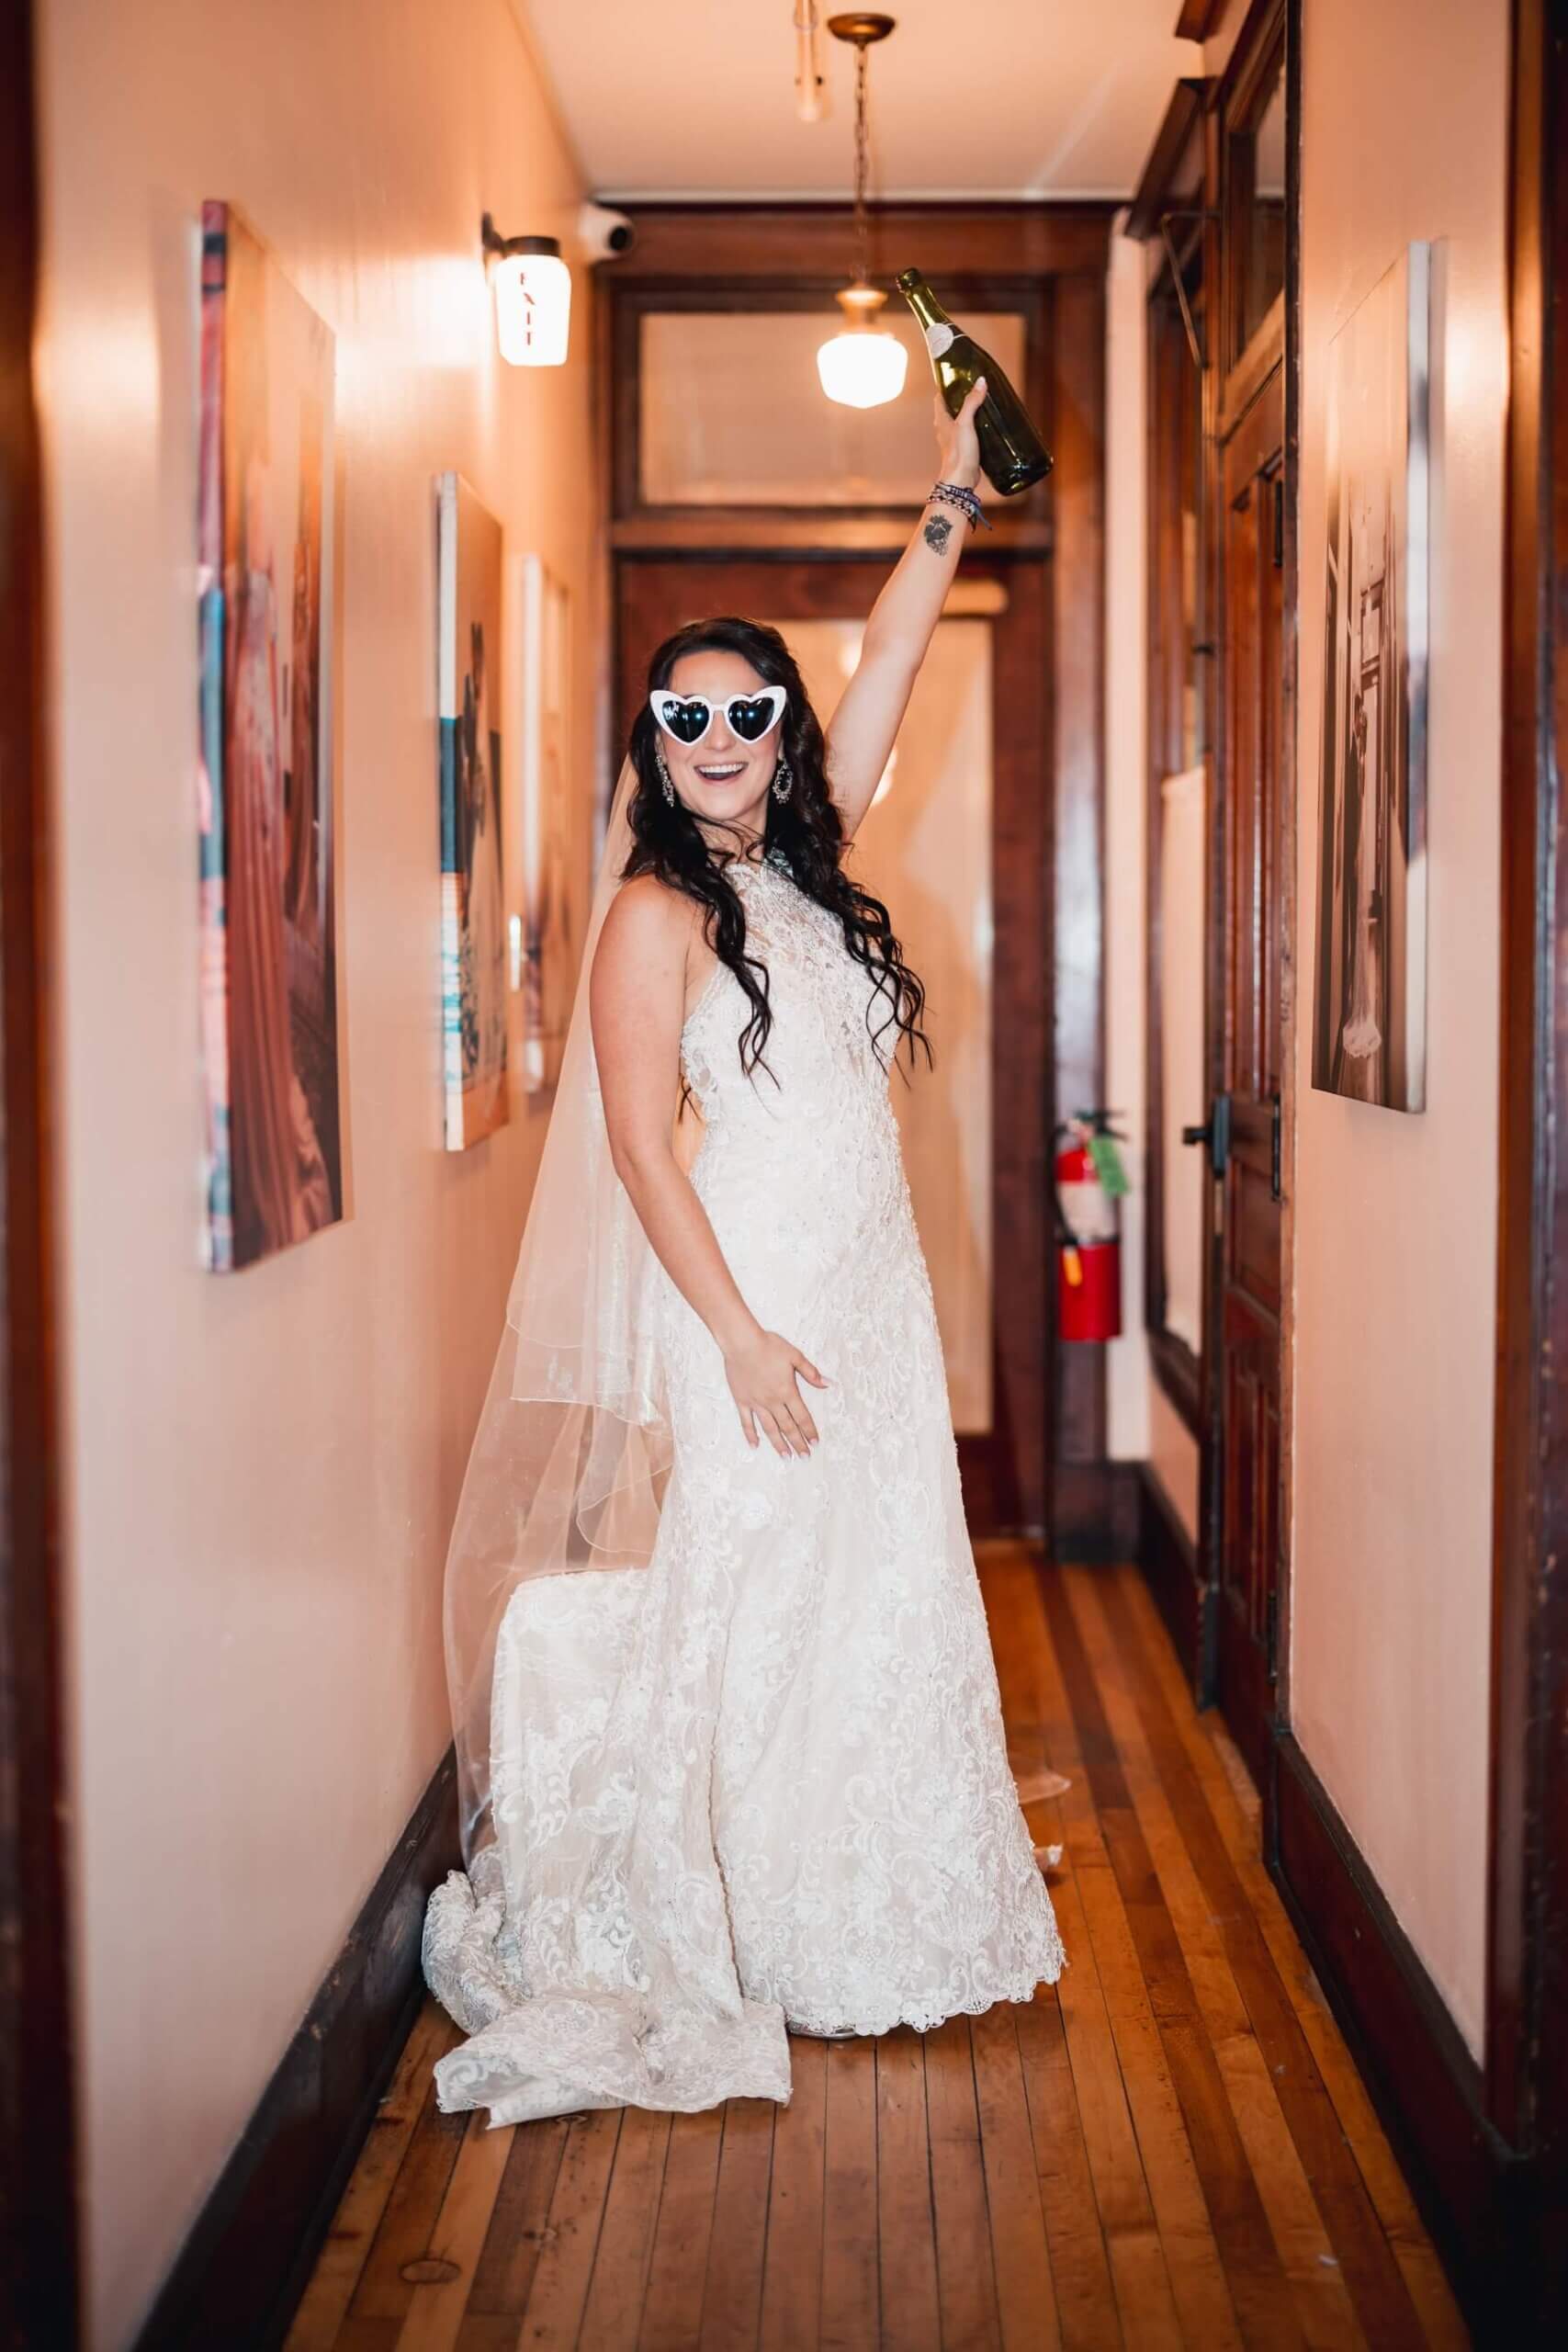 Bride wearing heart sunglasses holding bottle of champagne